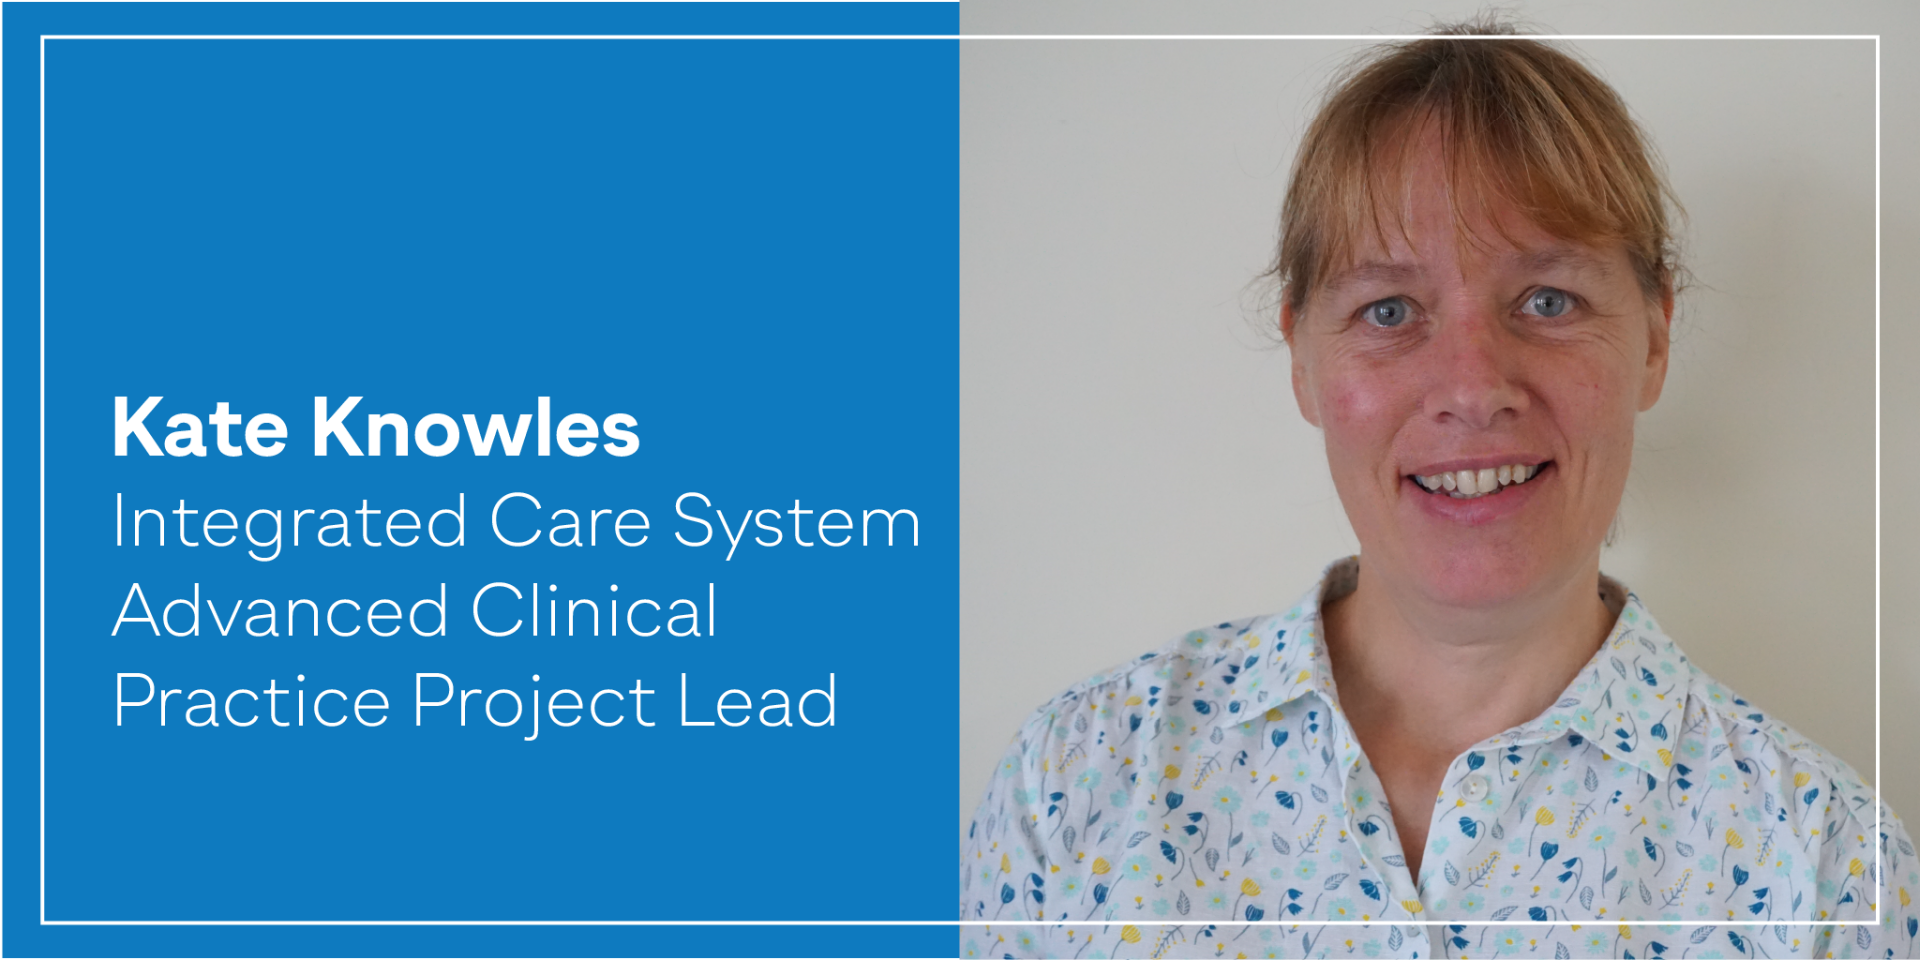 Kate Knowles - Integrated Care System Advanced Clinical Practice Project Lead